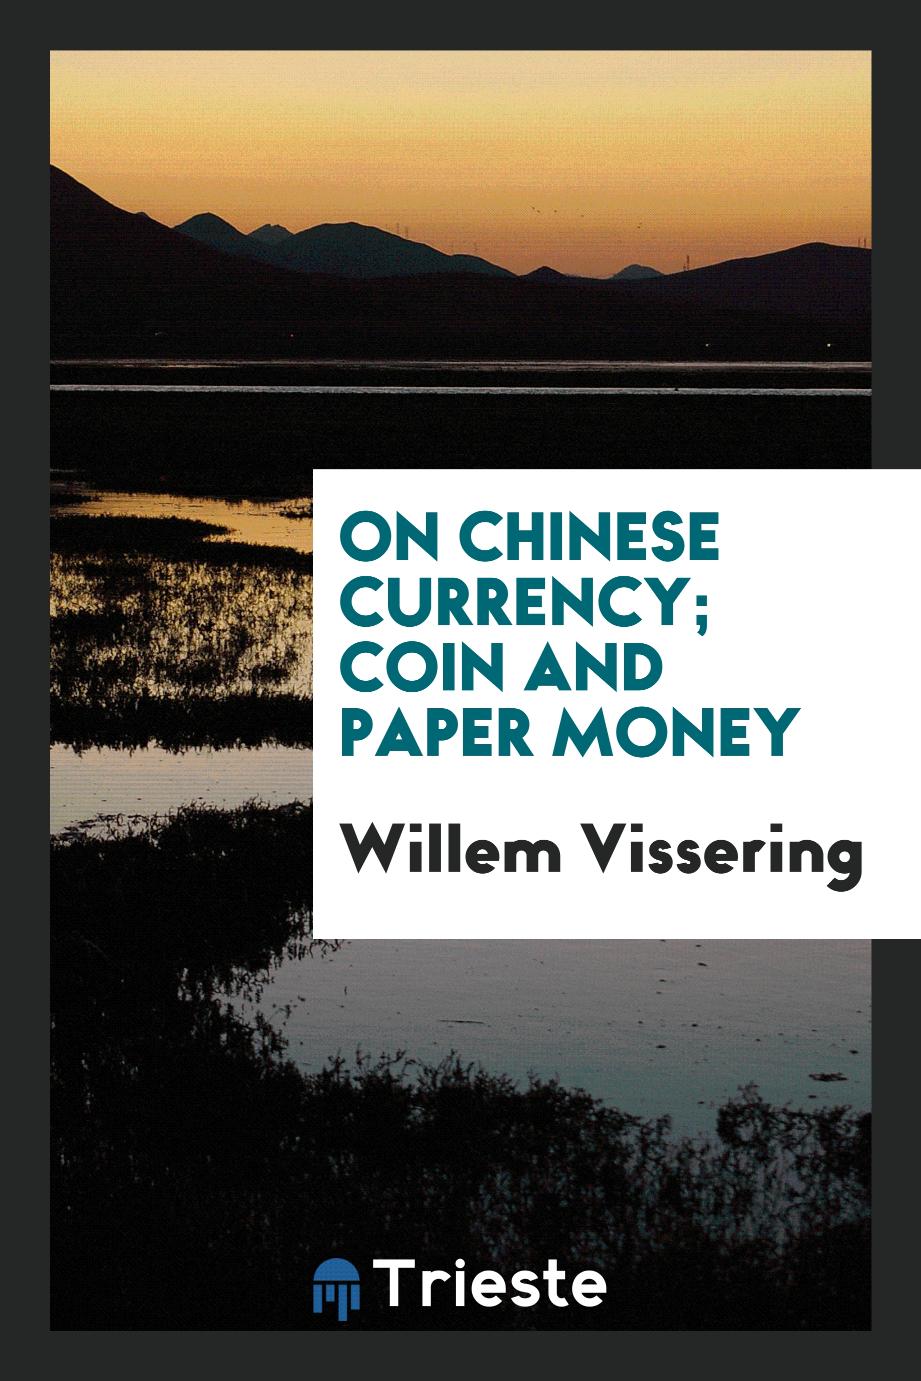 On Chinese currency; coin and paper money